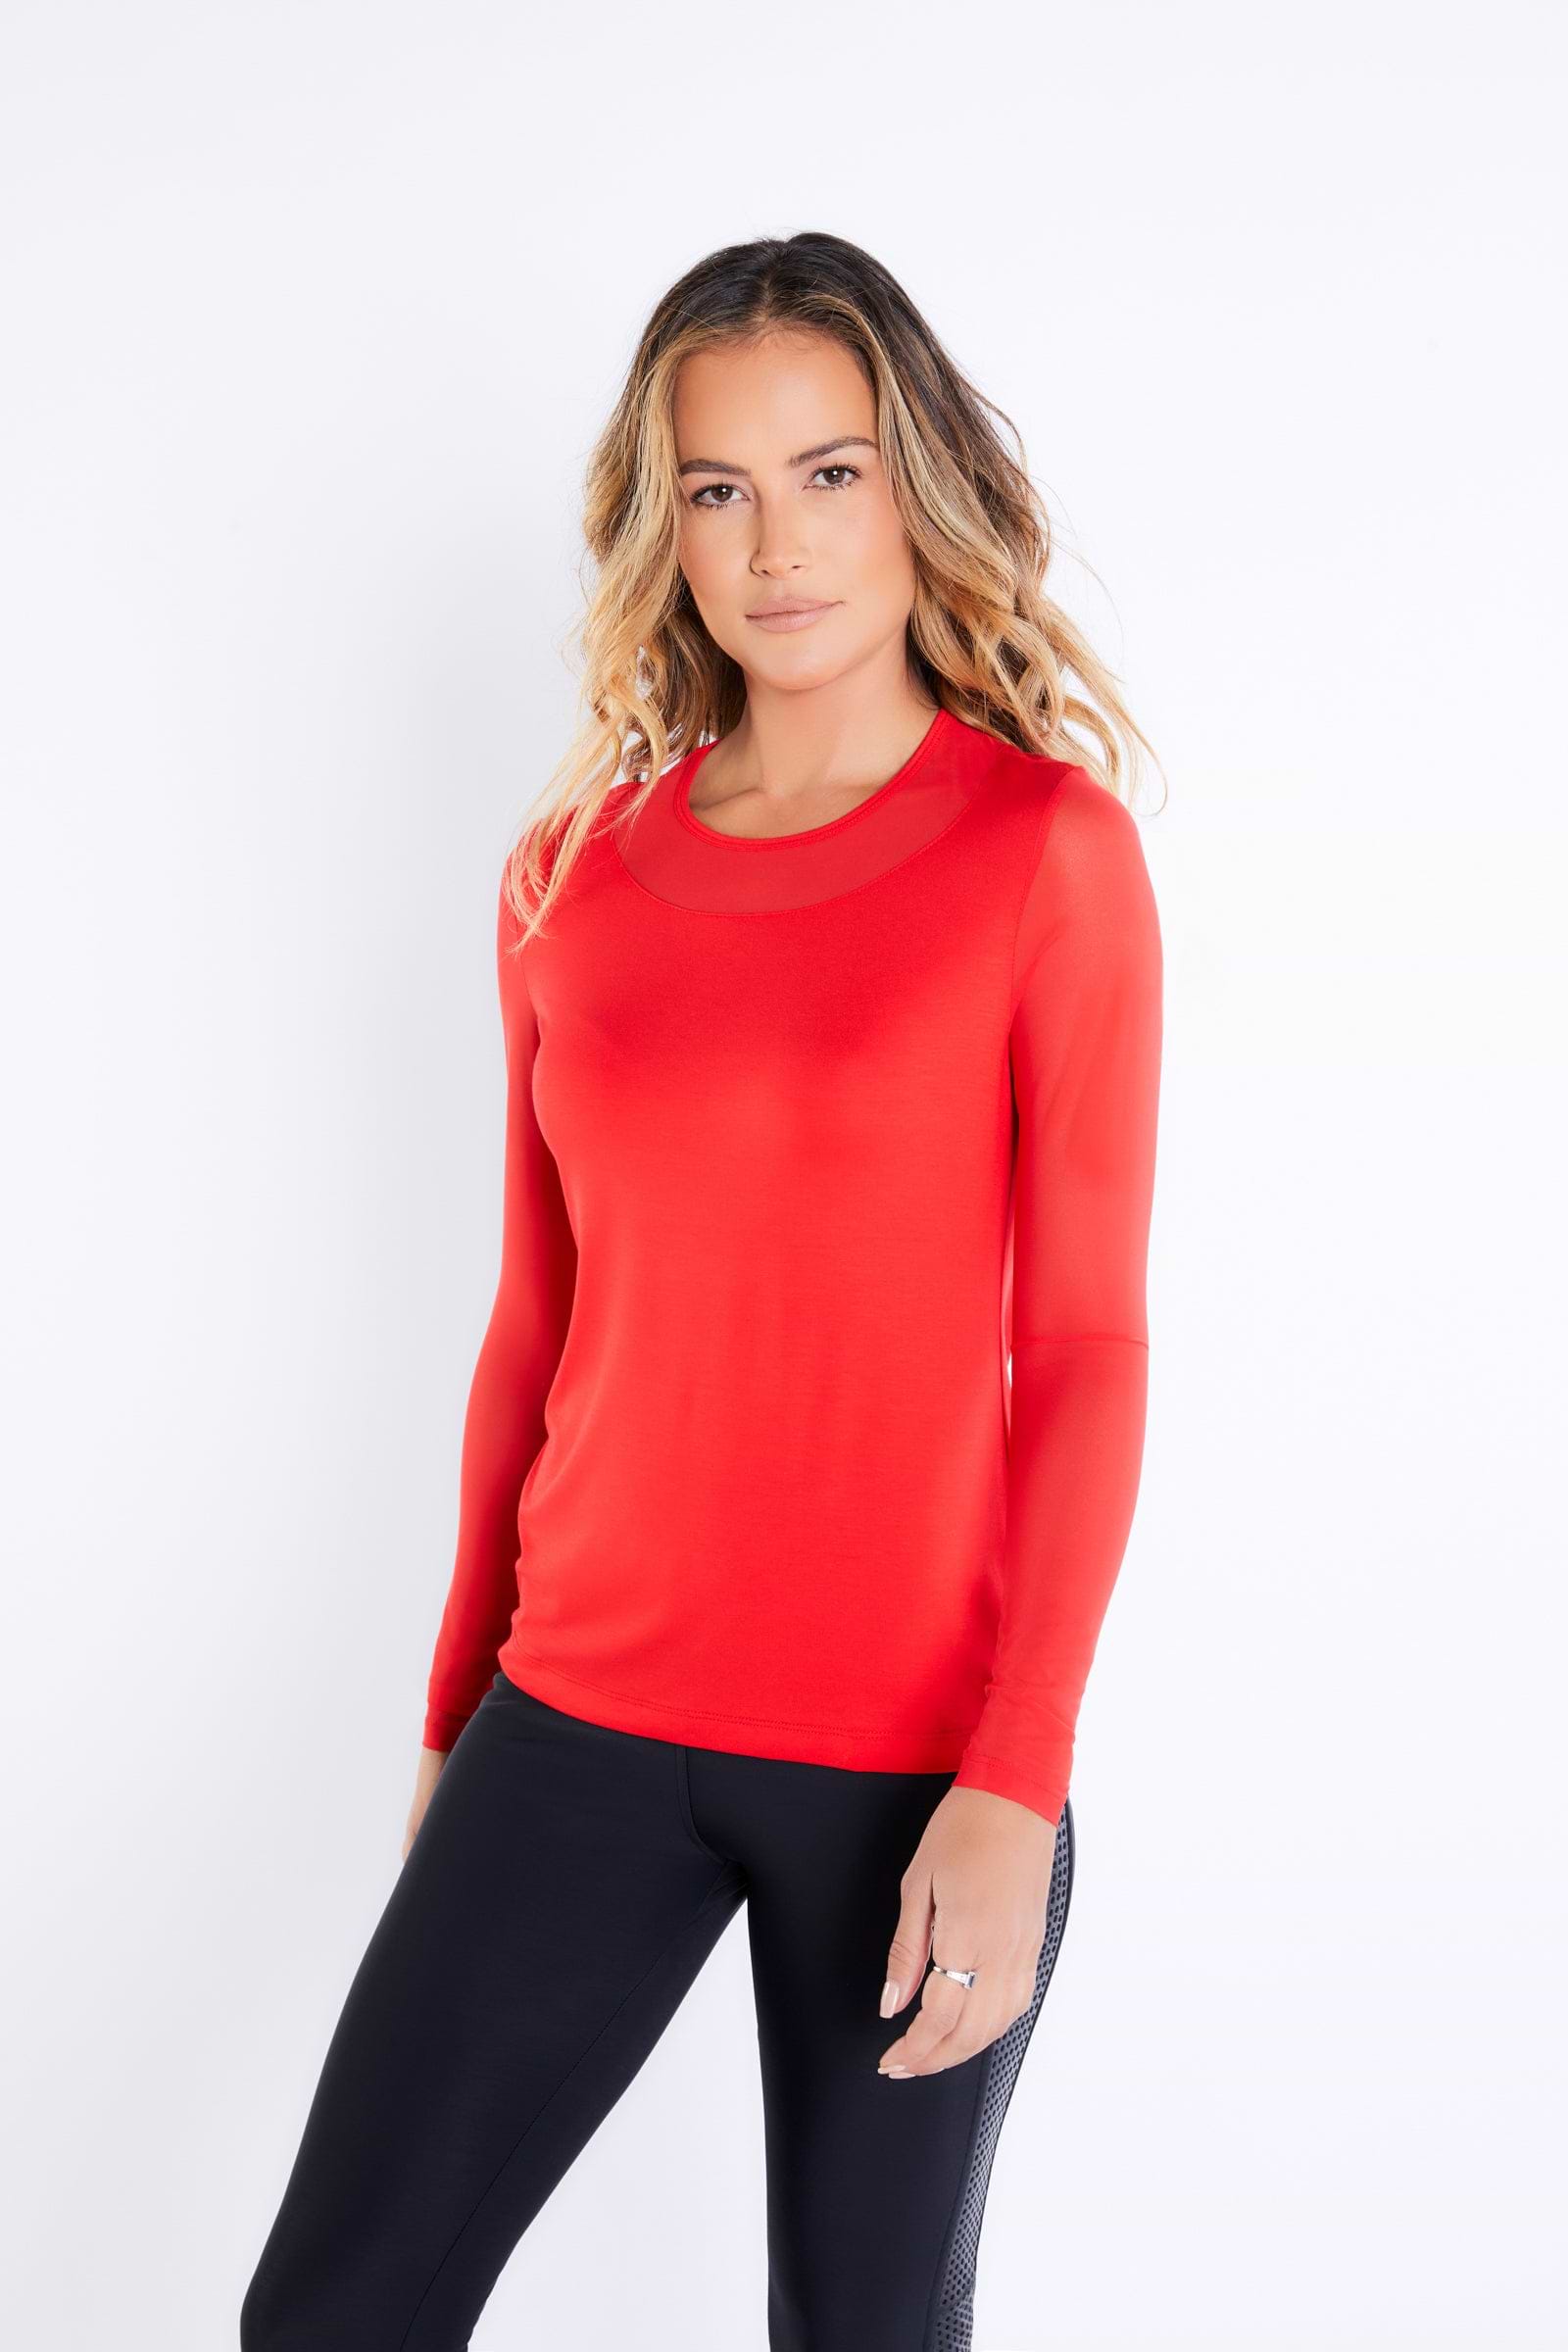 The Best Travel Top. Woman Showing the Front Profile of a Kim Mesh-Sleeve Top in Pima Modal in Atomic Red.